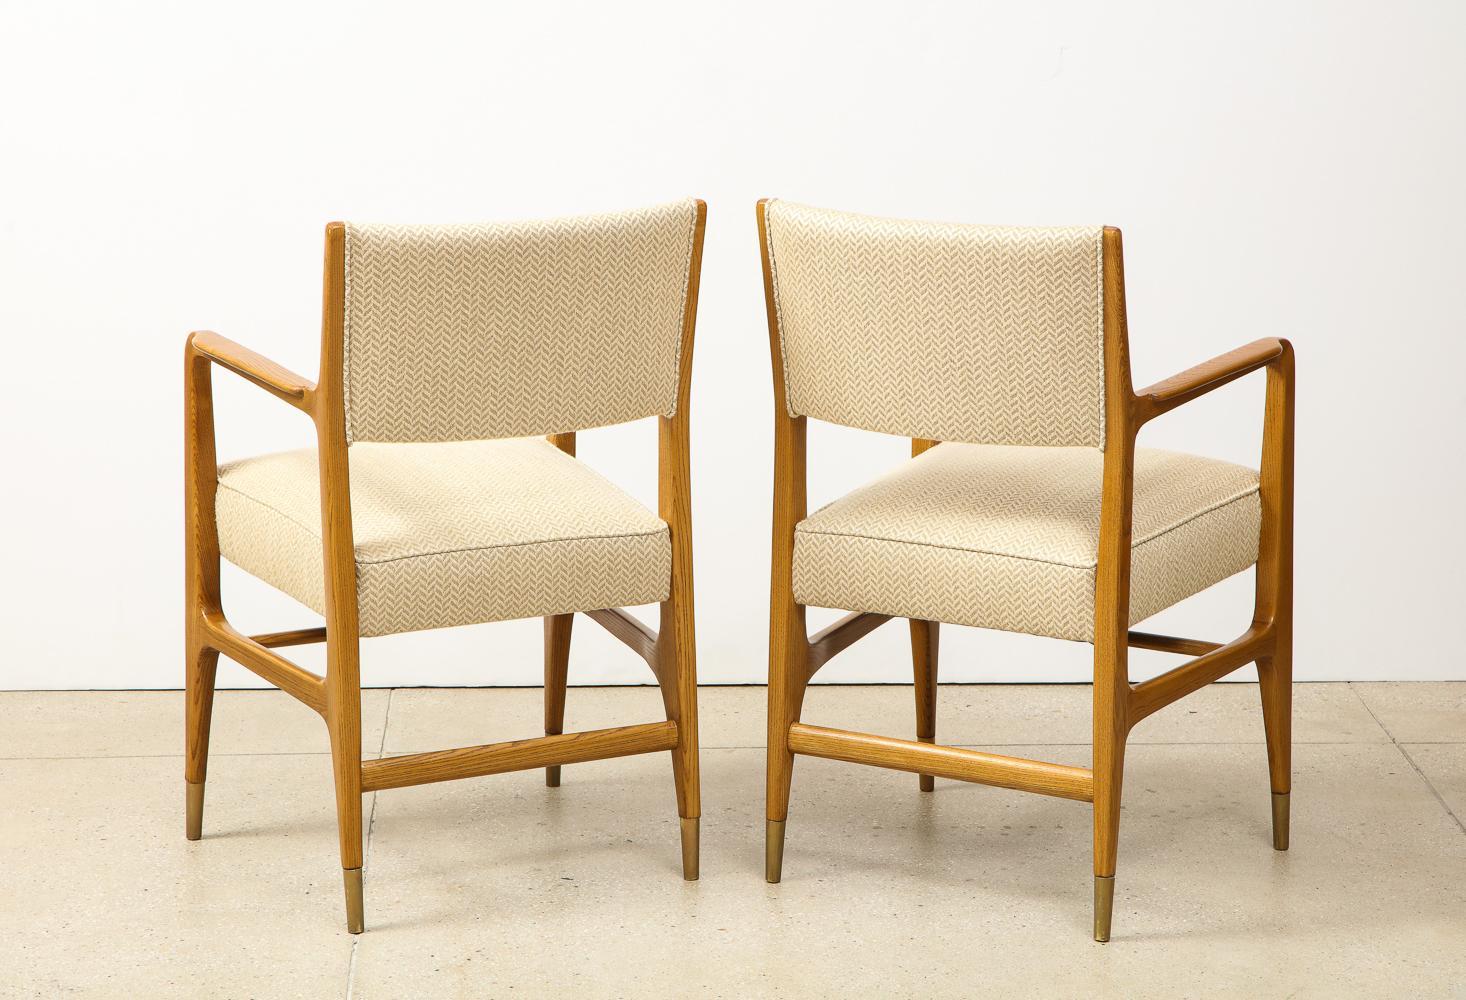 Hand-Crafted Rare Pair of Open Armchairs by Gio Ponti